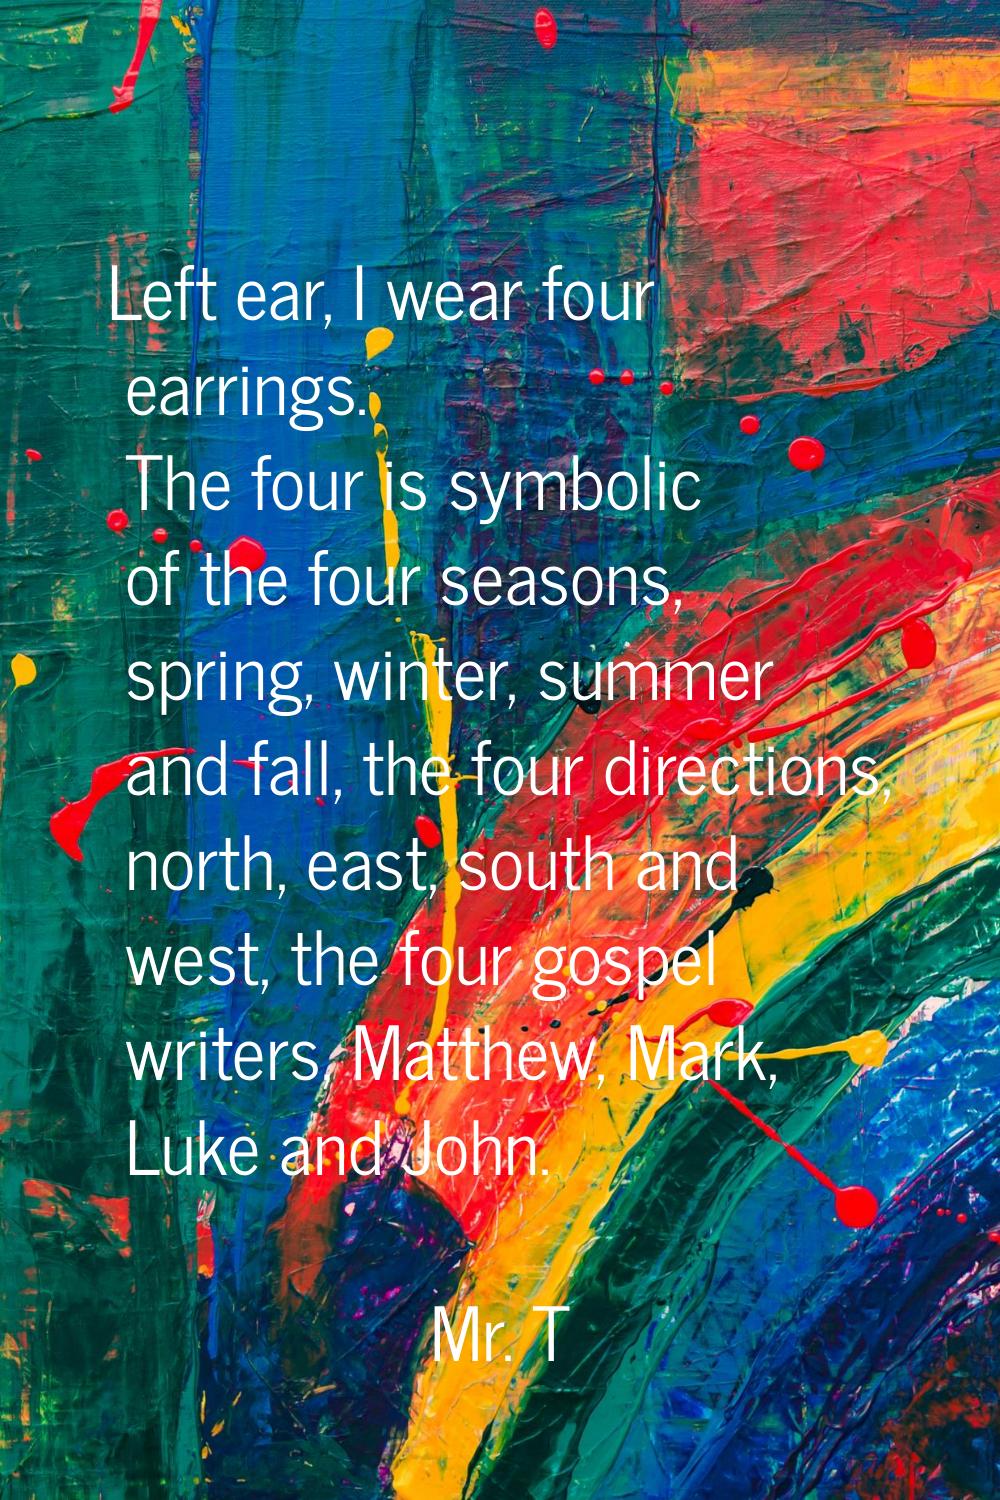 Left ear, I wear four earrings. The four is symbolic of the four seasons, spring, winter, summer an